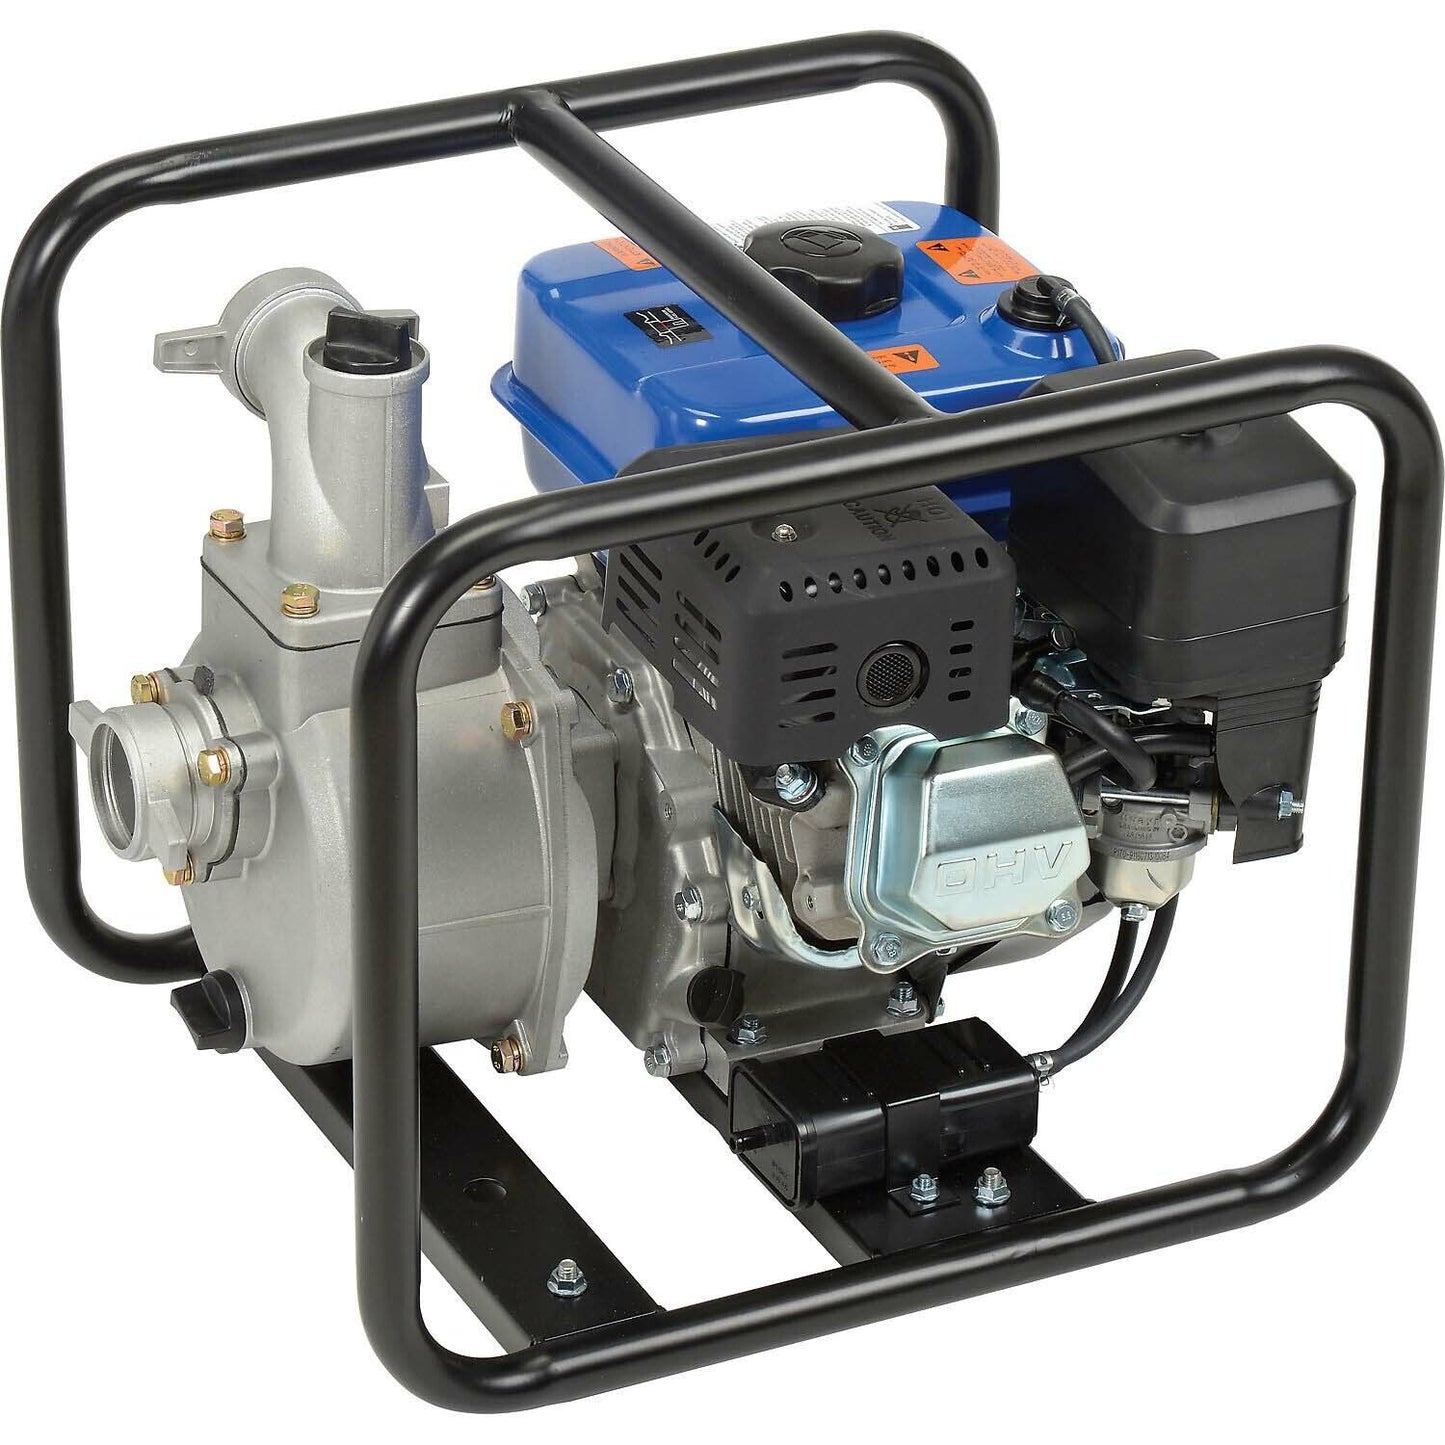 Portable WATER PUMP - 2" In and Out - 158 GPM - 7 HP - Gas Engine - 92 ft Head